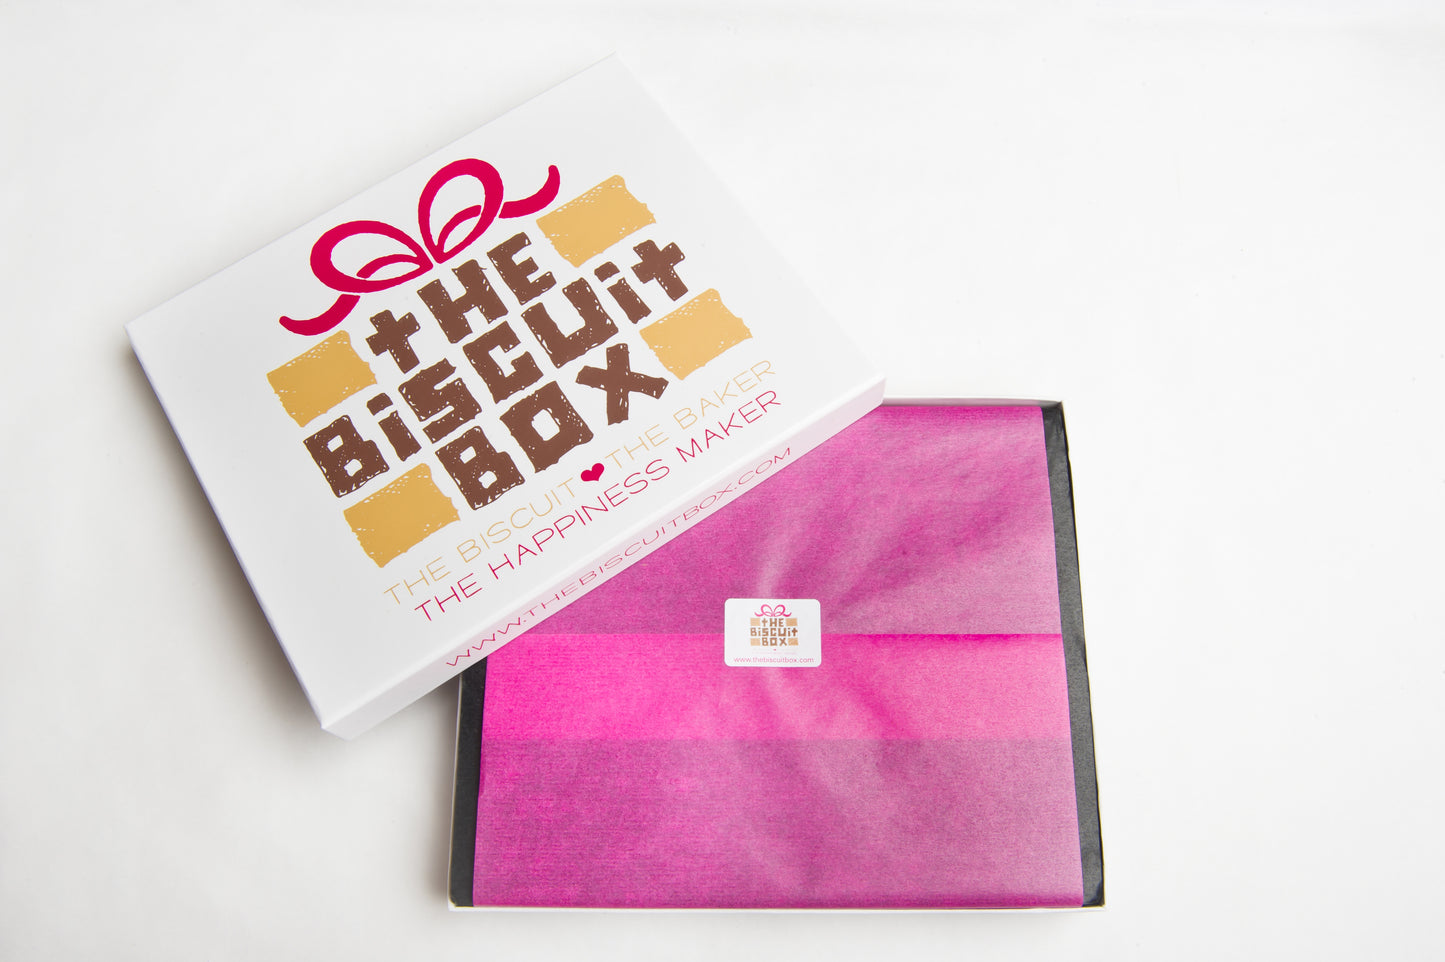 biscuit box packaging that shows branded lid and mini branded sticker. Pink tissue paper. shallow box that can fit through letterbox.